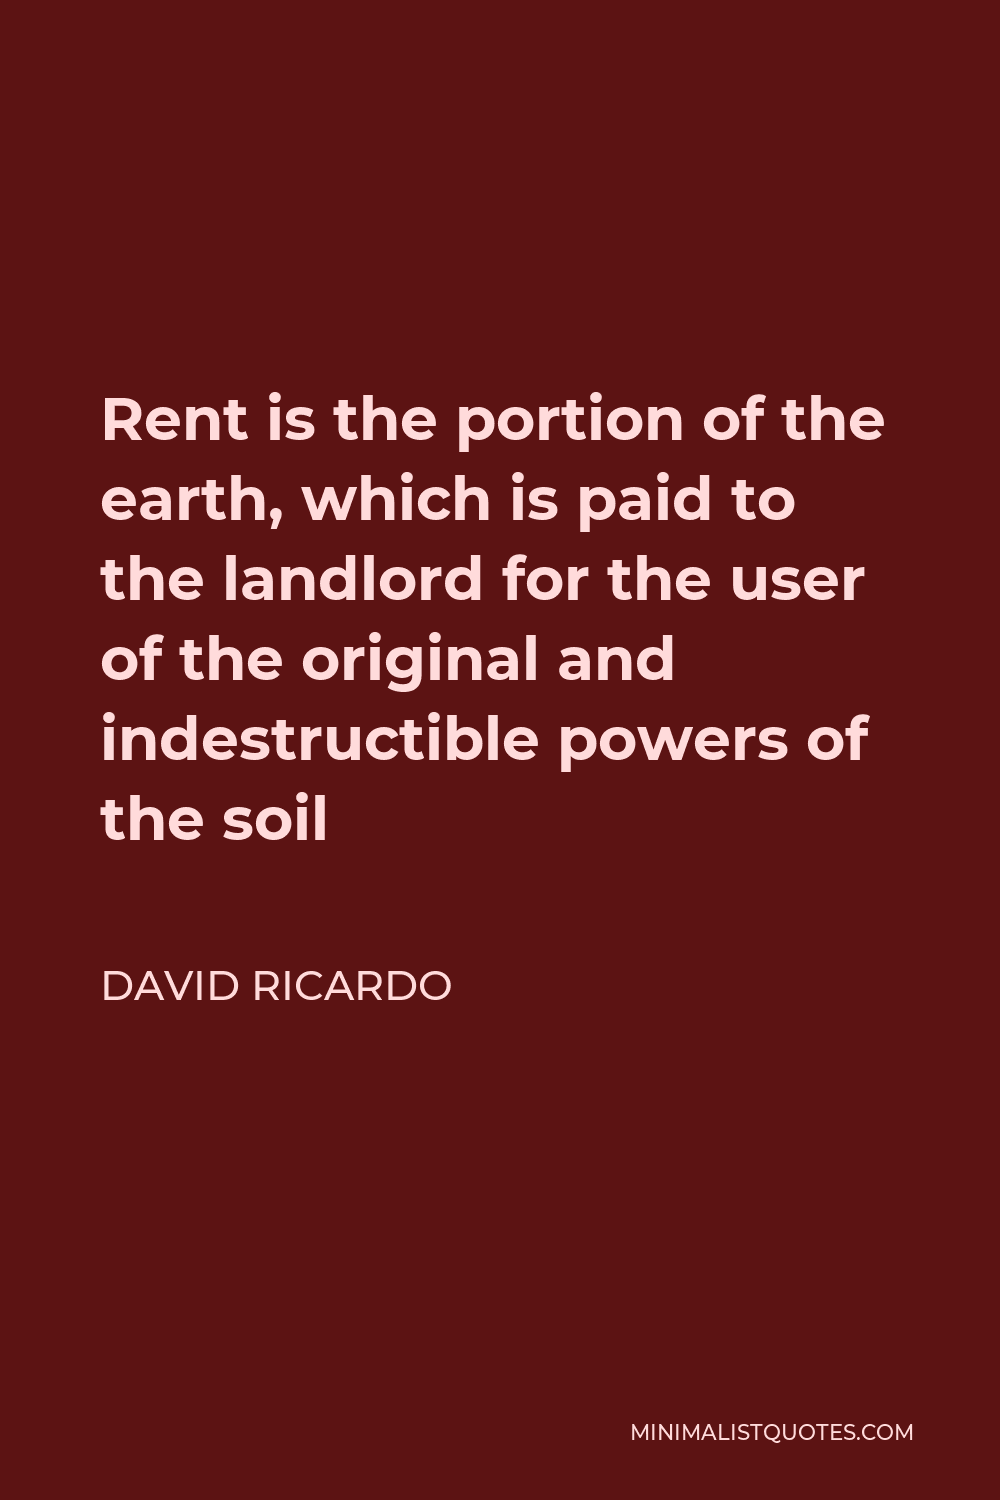 David Ricardo Quote - Rent is the portion of the earth, which is paid to the landlord for the user of the original and indestructible powers of the soil